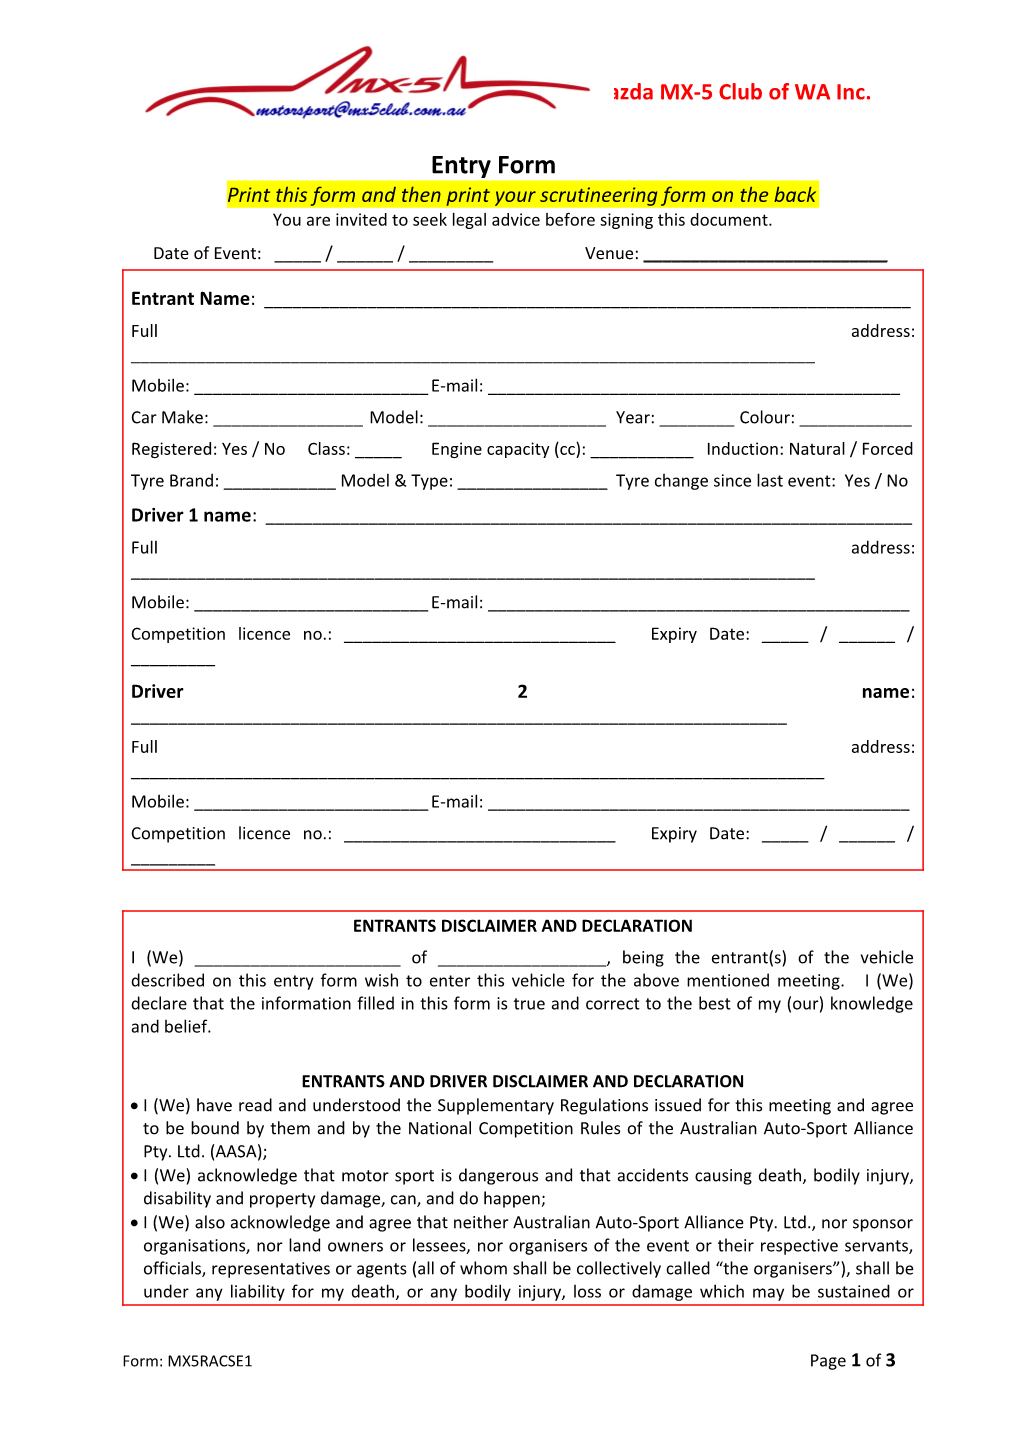 Print This Form and Then Print Your Scrutineering Form on the Back